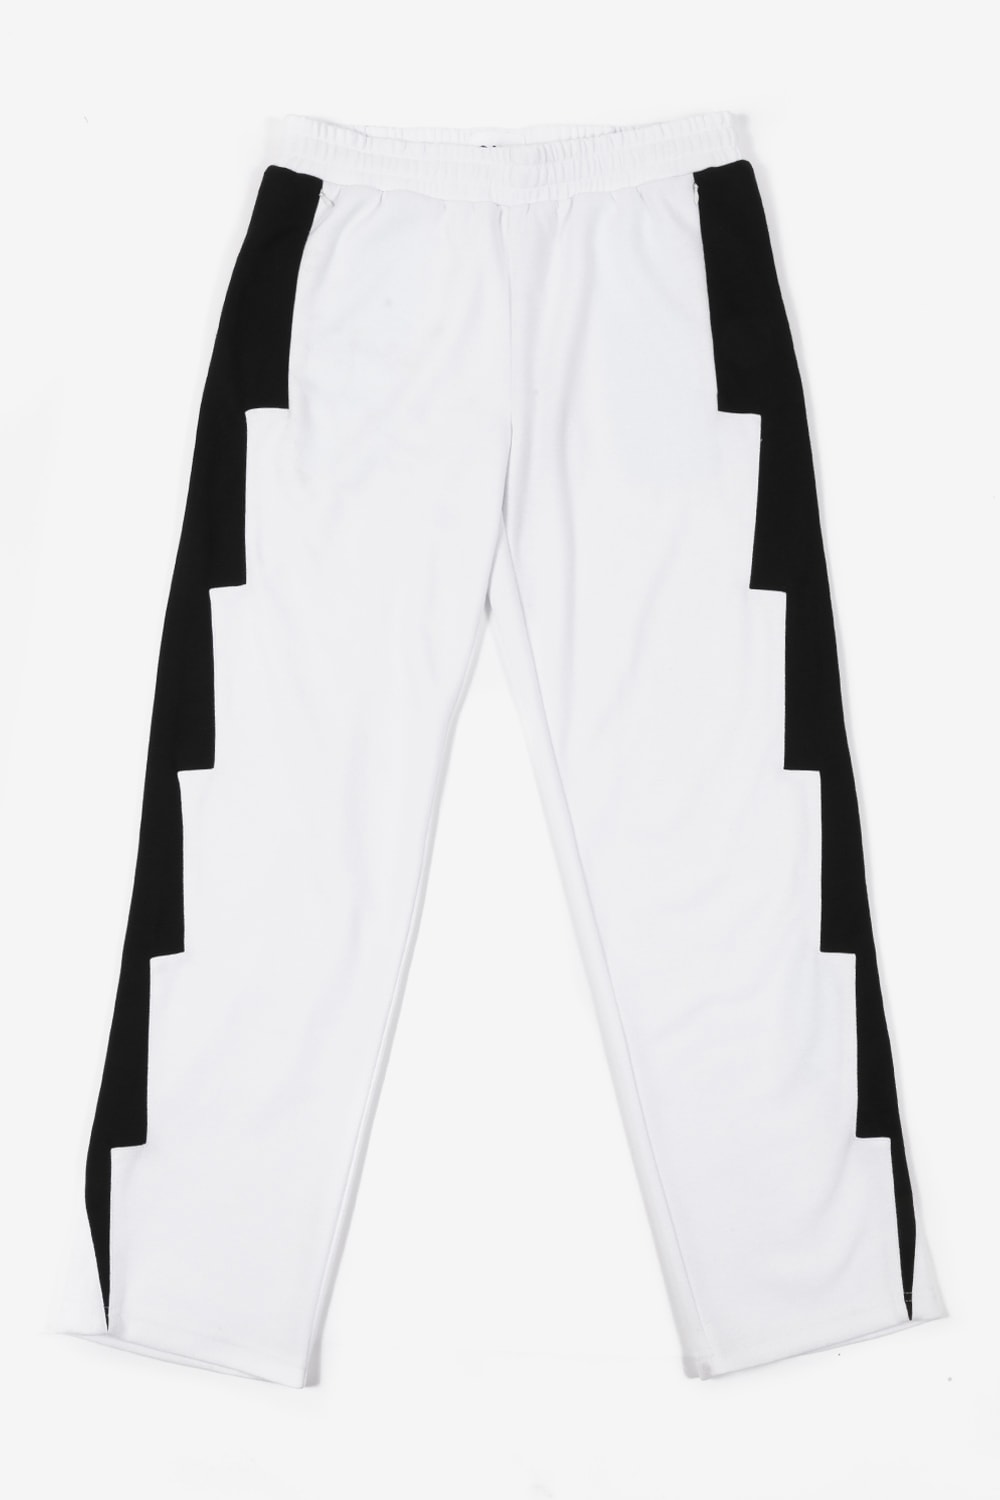 Somehting to Hate On Frenzy Friday Feature shopify white track suit sky london fashion sportswear